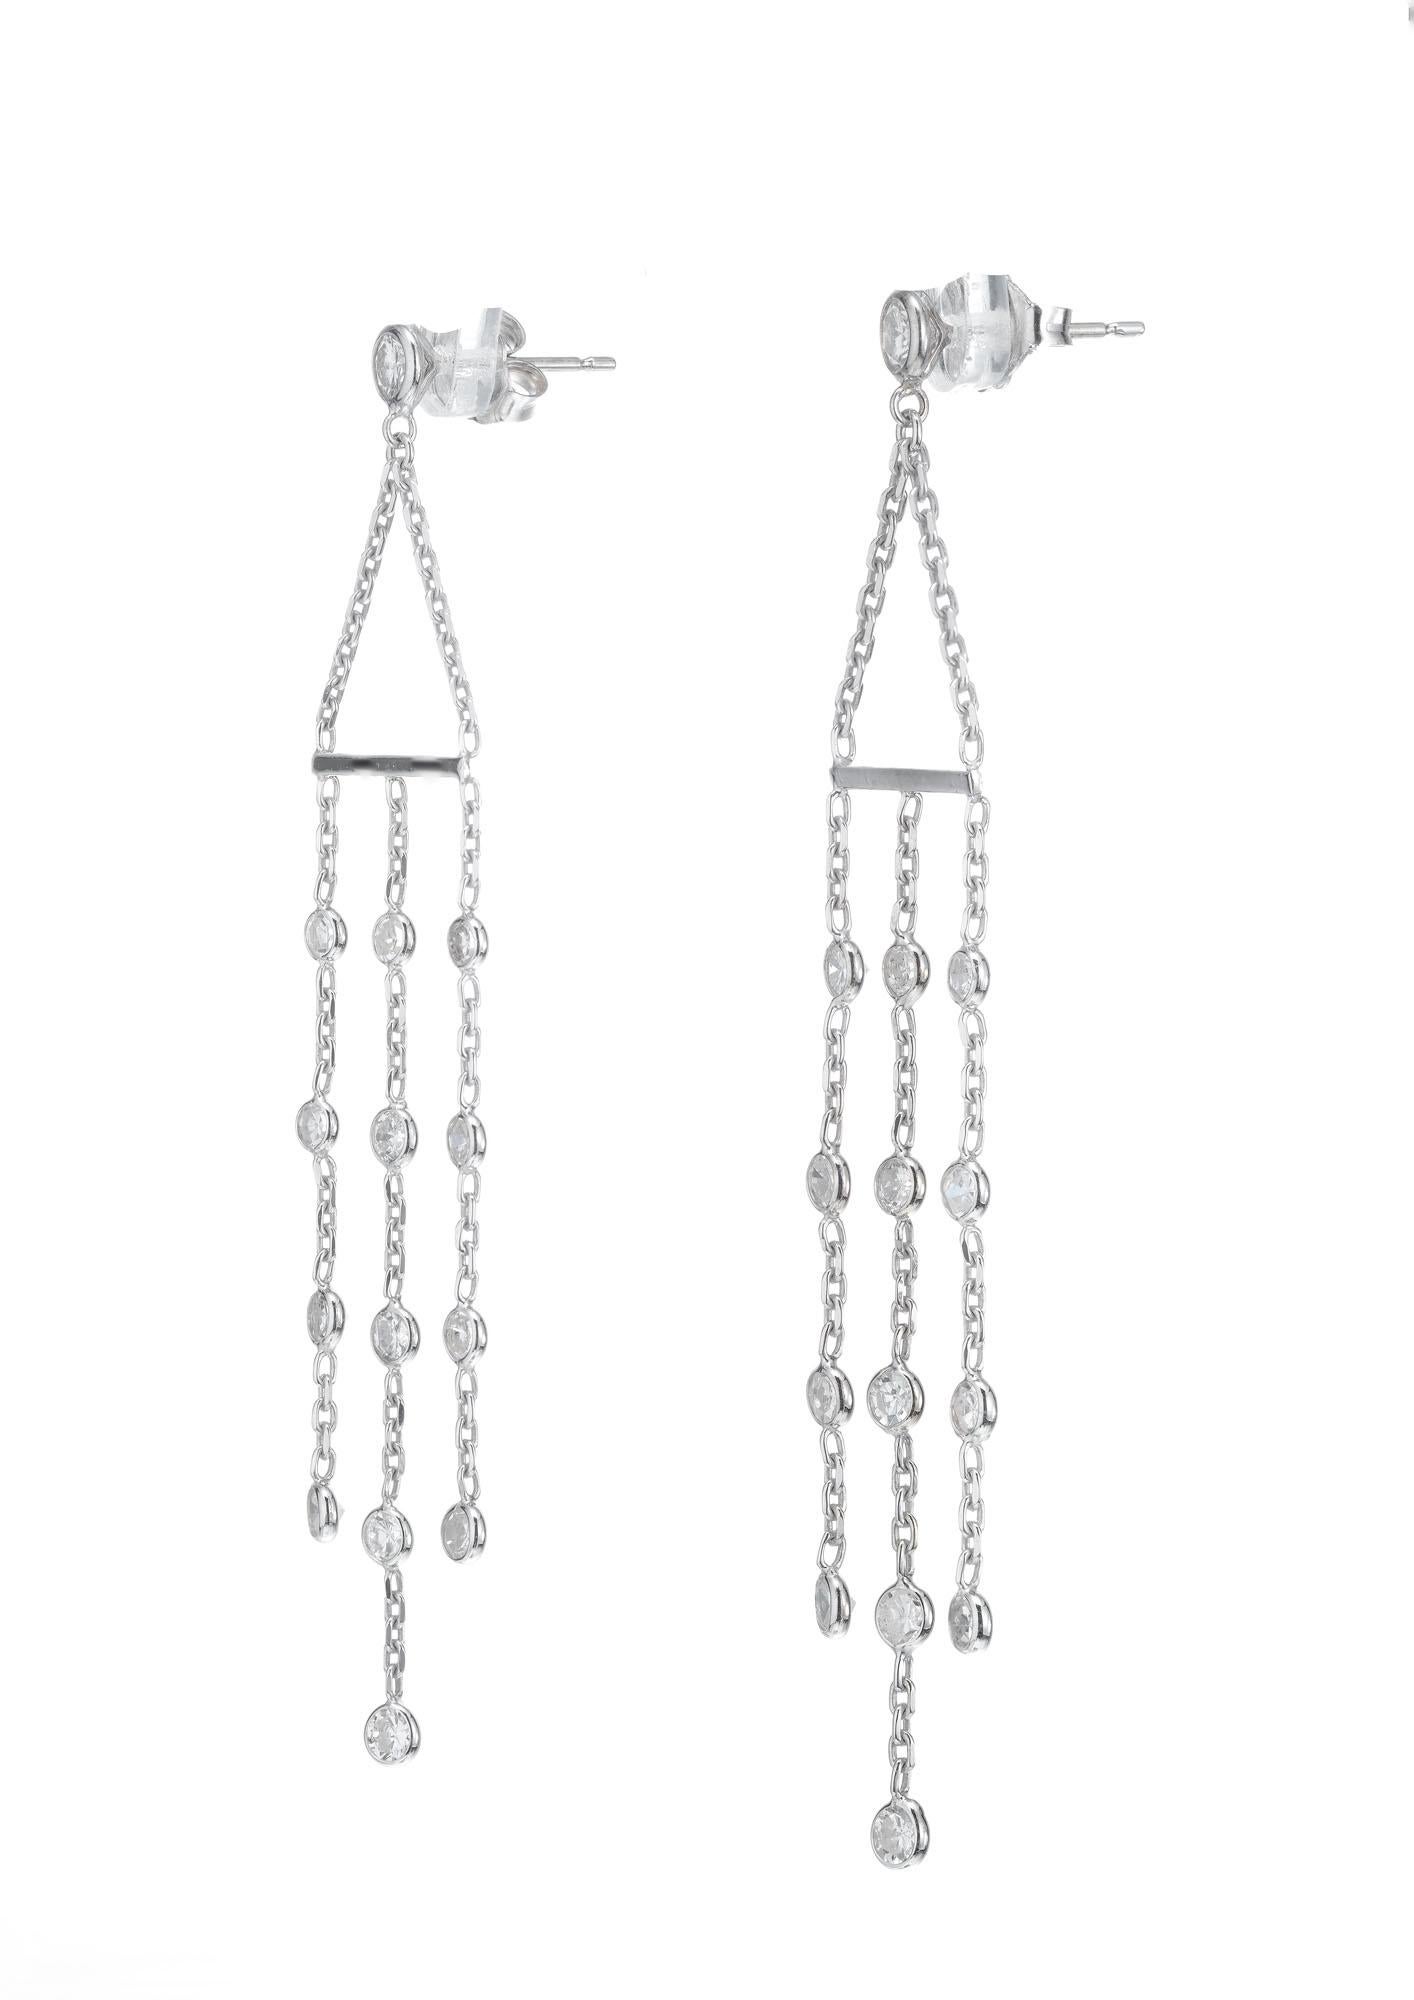 Diamond dangle chandelier earrings. Vintage style in 14k white gold with 28 round full cut diamonds. Created in the Peter Suchy Workshop.

2 round full cut diamonds, approx. total weight .24cts, H-I, VS1 to SI1
26 round full cut diamonds, approx.